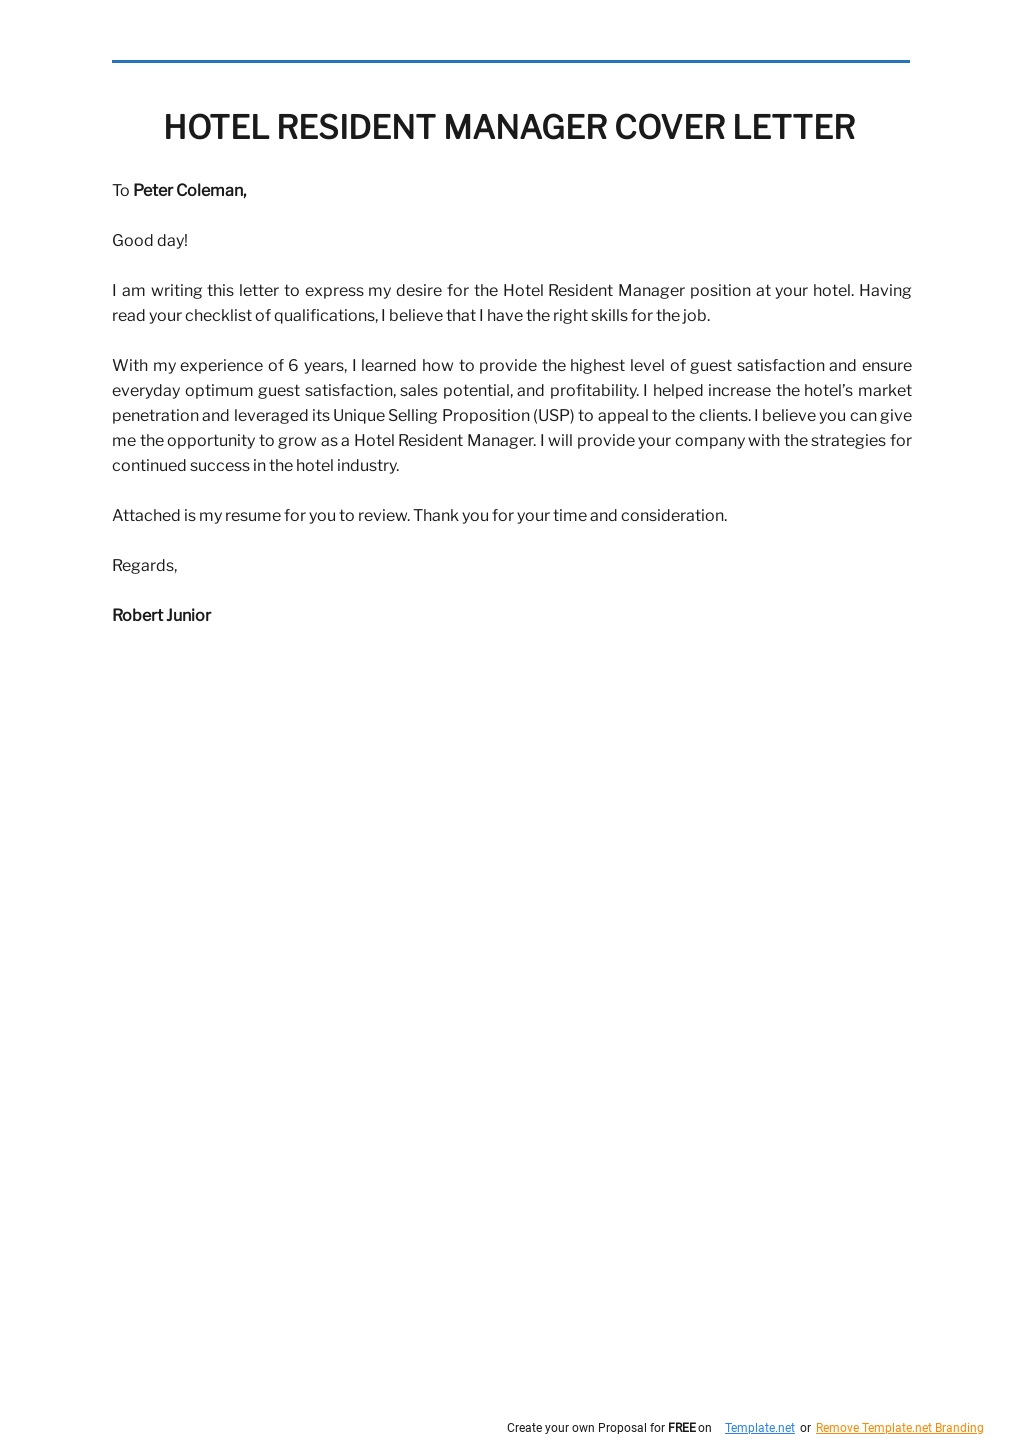 Free Hotel Resident Manager Cover Letter Template.jpe